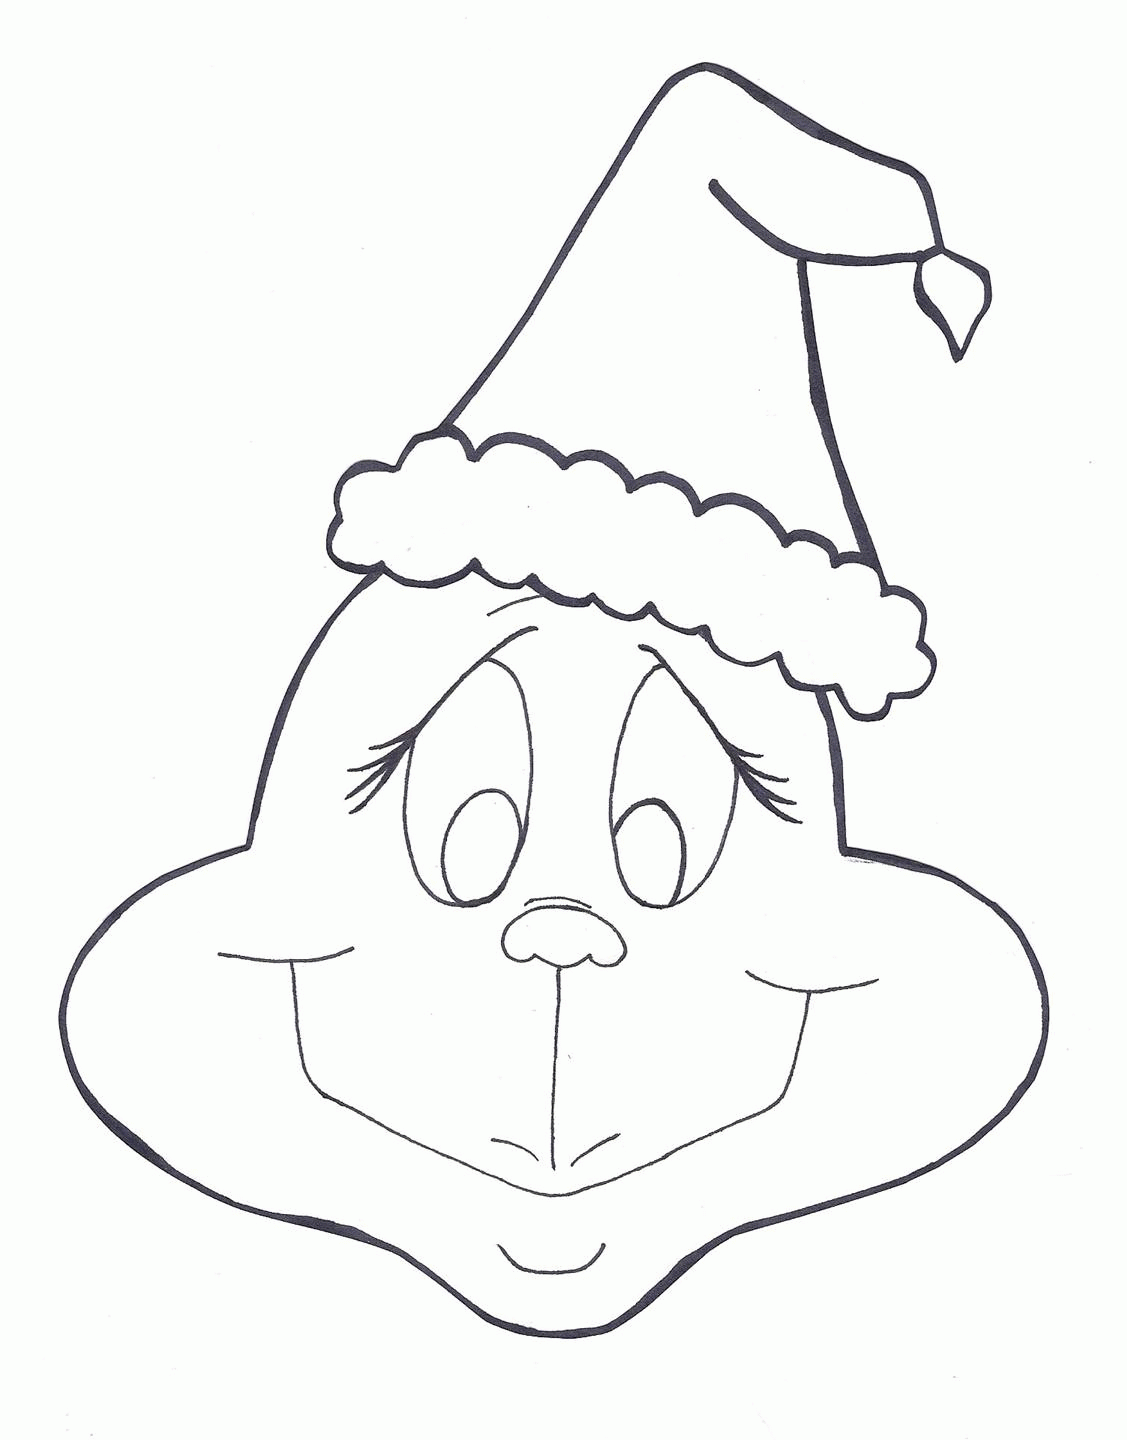 Related Grinch Coloring Pages item-13718, Grinch Coloring Pages ...